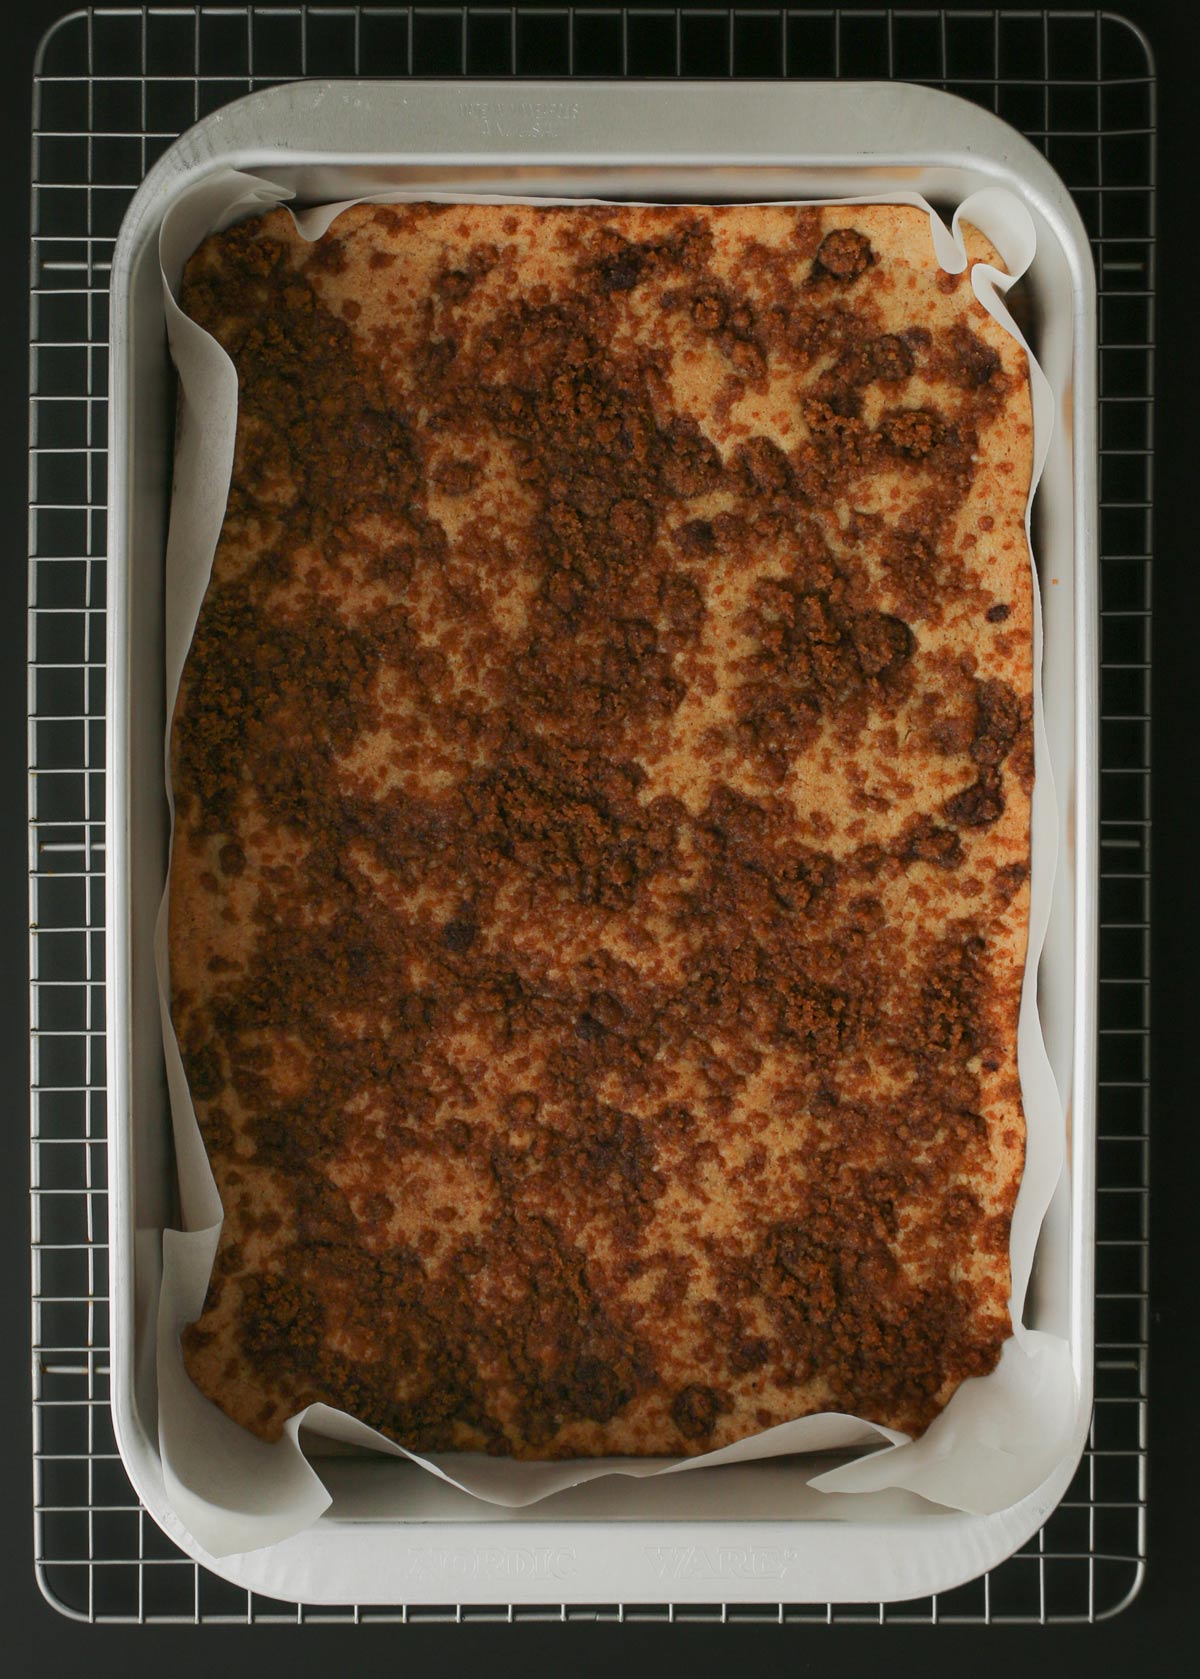 baked snickerdoodle bars in pan.